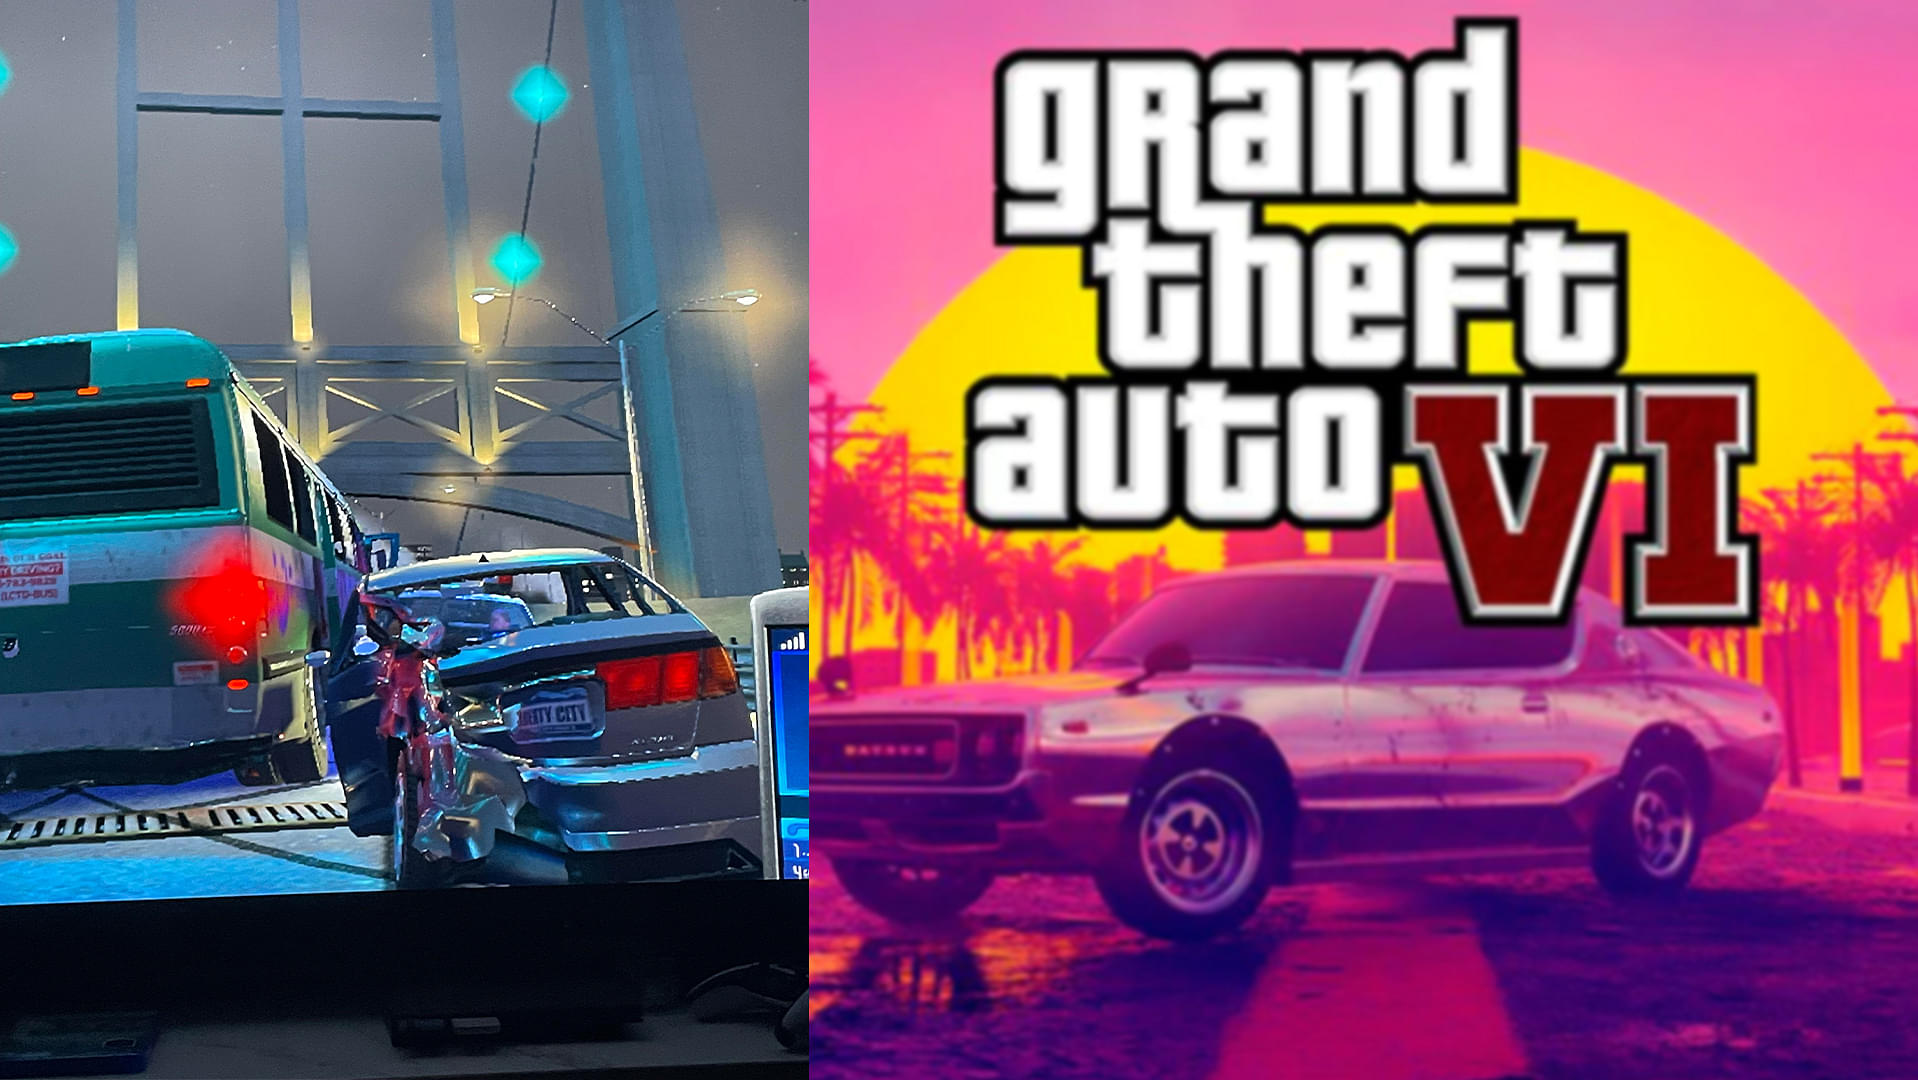 An image of destroyed car collaged with GTA 6 cover